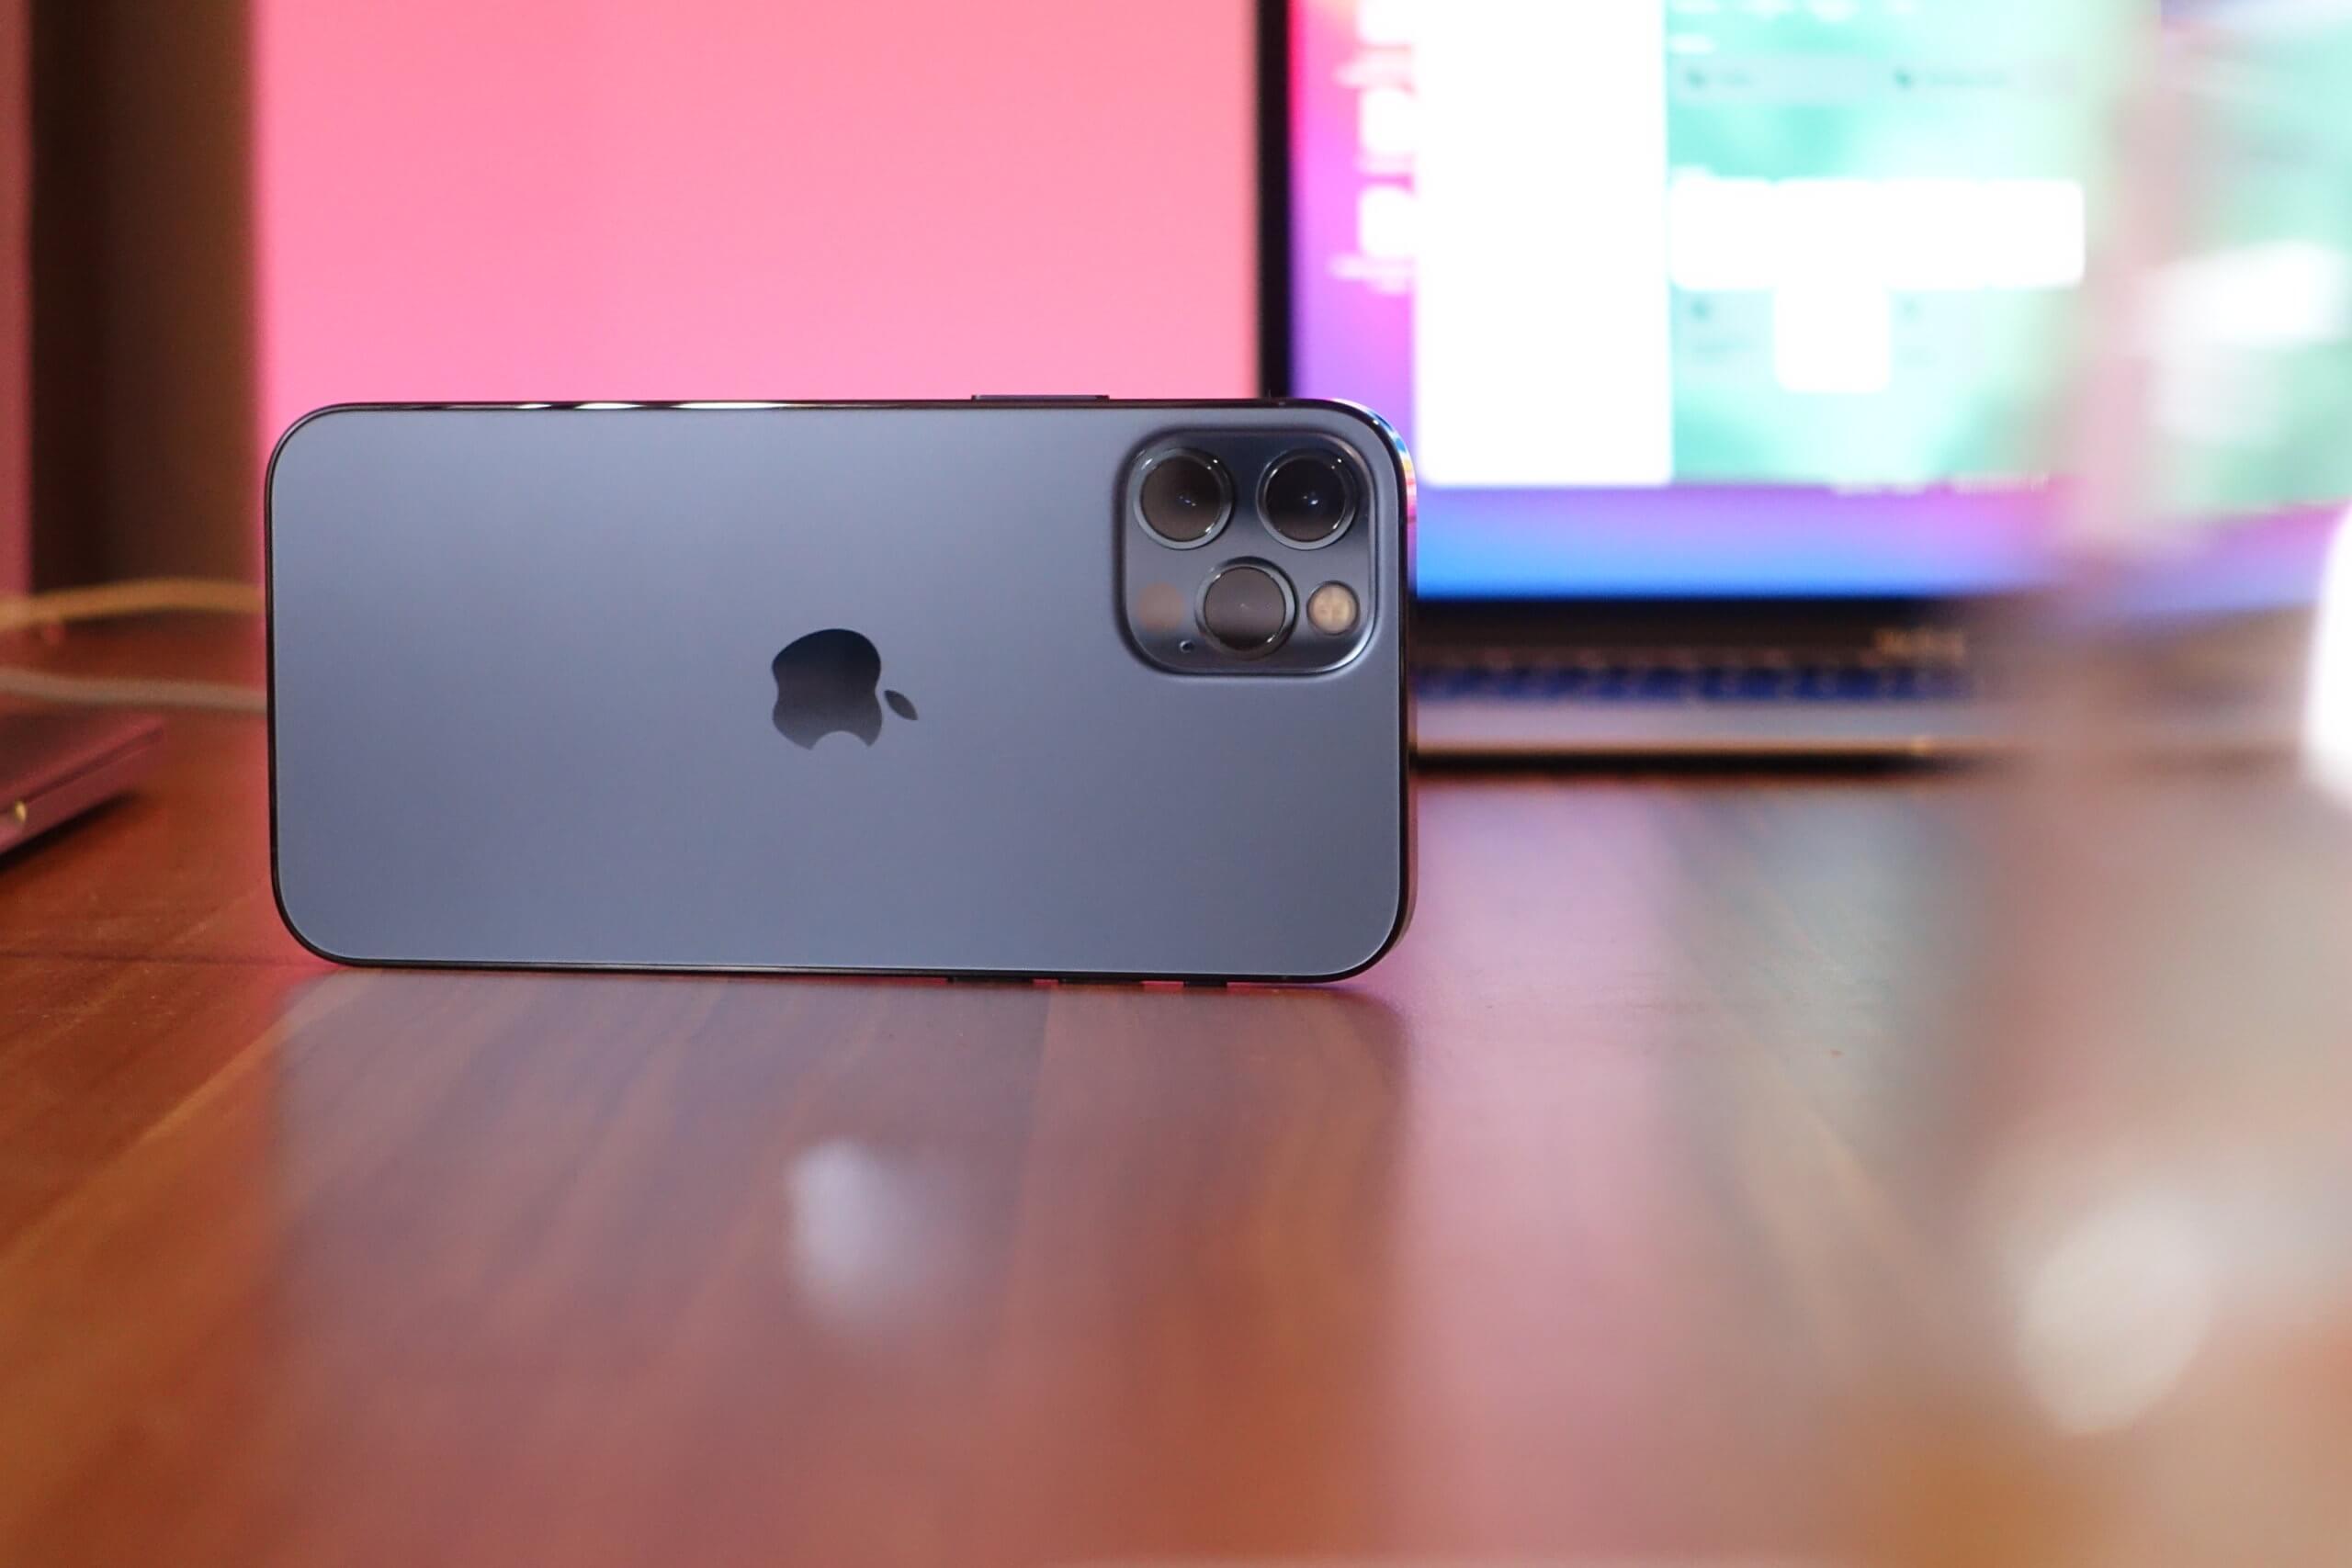 The iPhone 13 Pro Max dummy should feature new and larger cameras